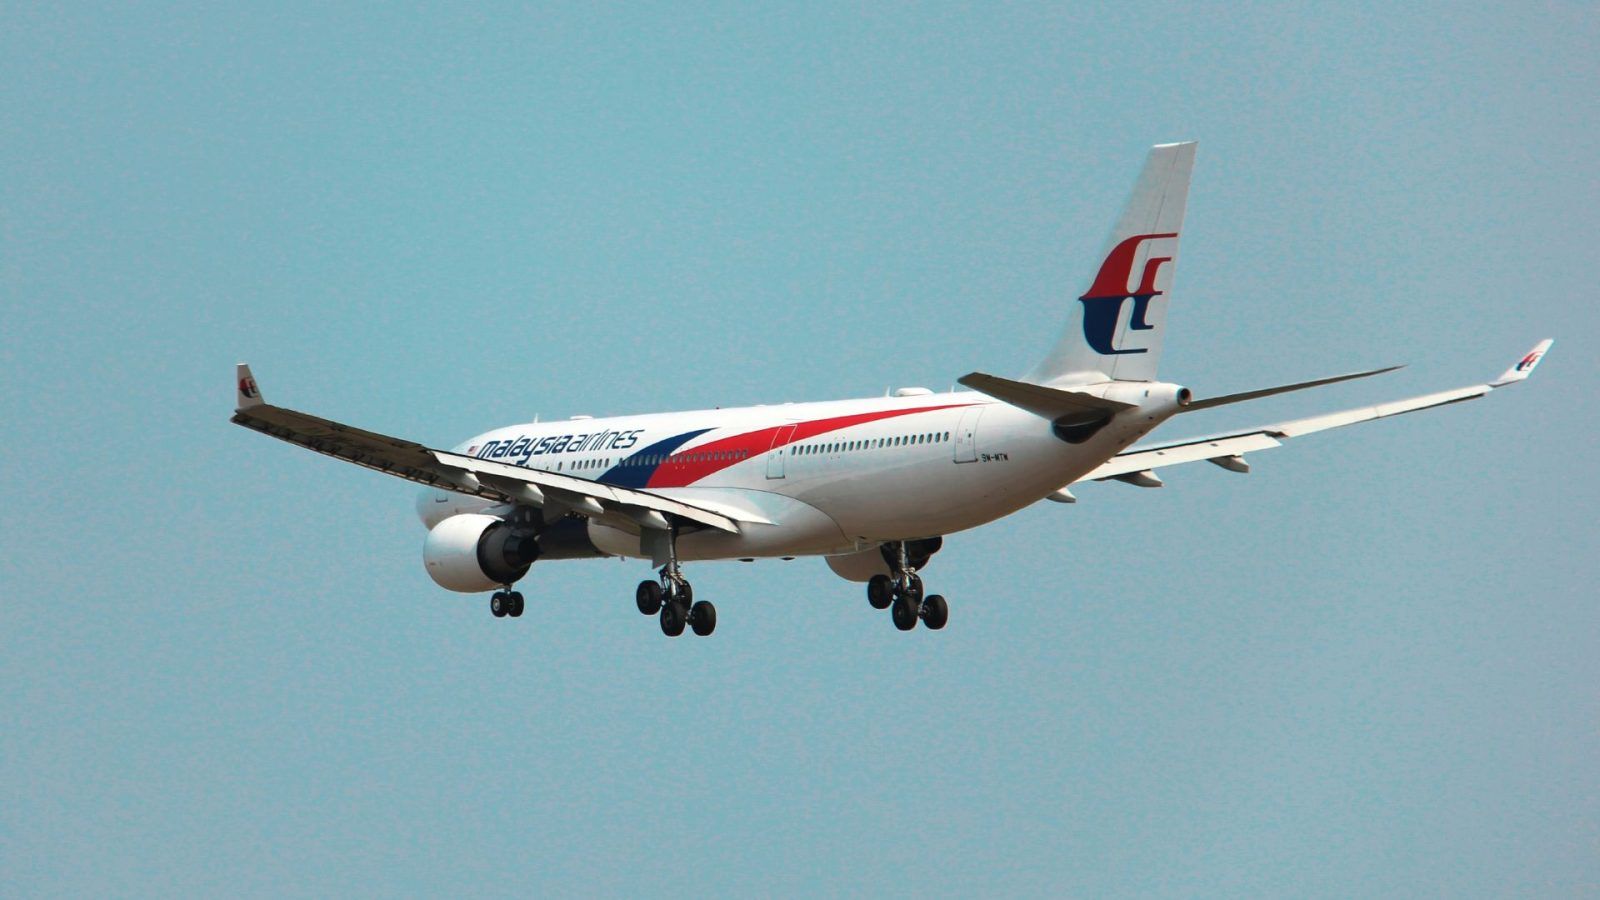 Malaysia Airlines Passengers Can Now Use Devices In Flight Mode On Plane